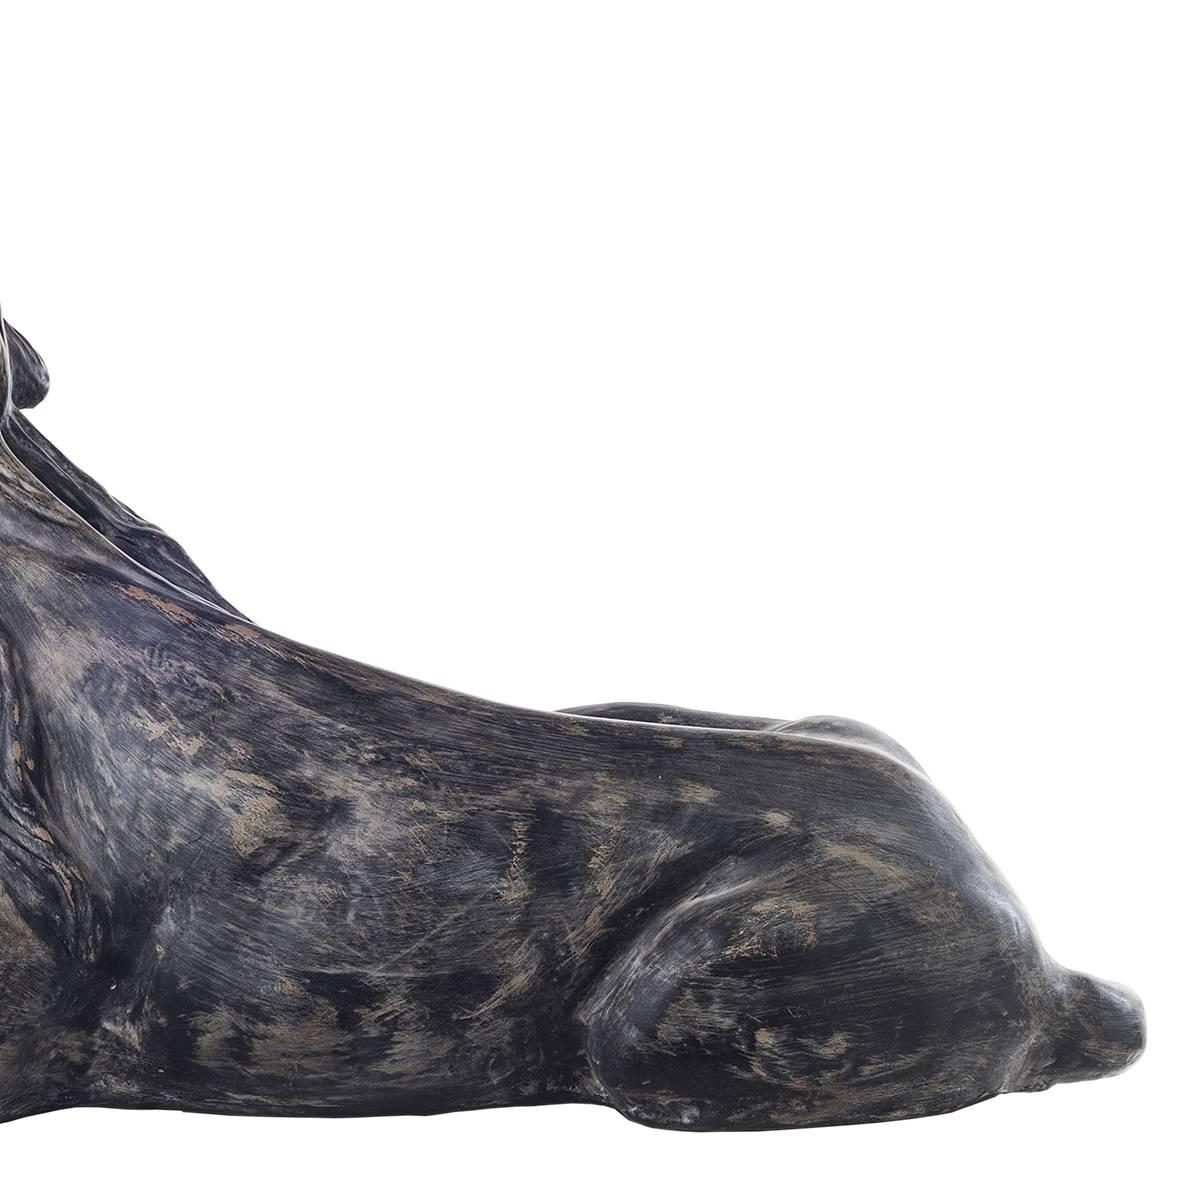 Patinated Ceramic Reproduction of Lying Down Lion For Sale